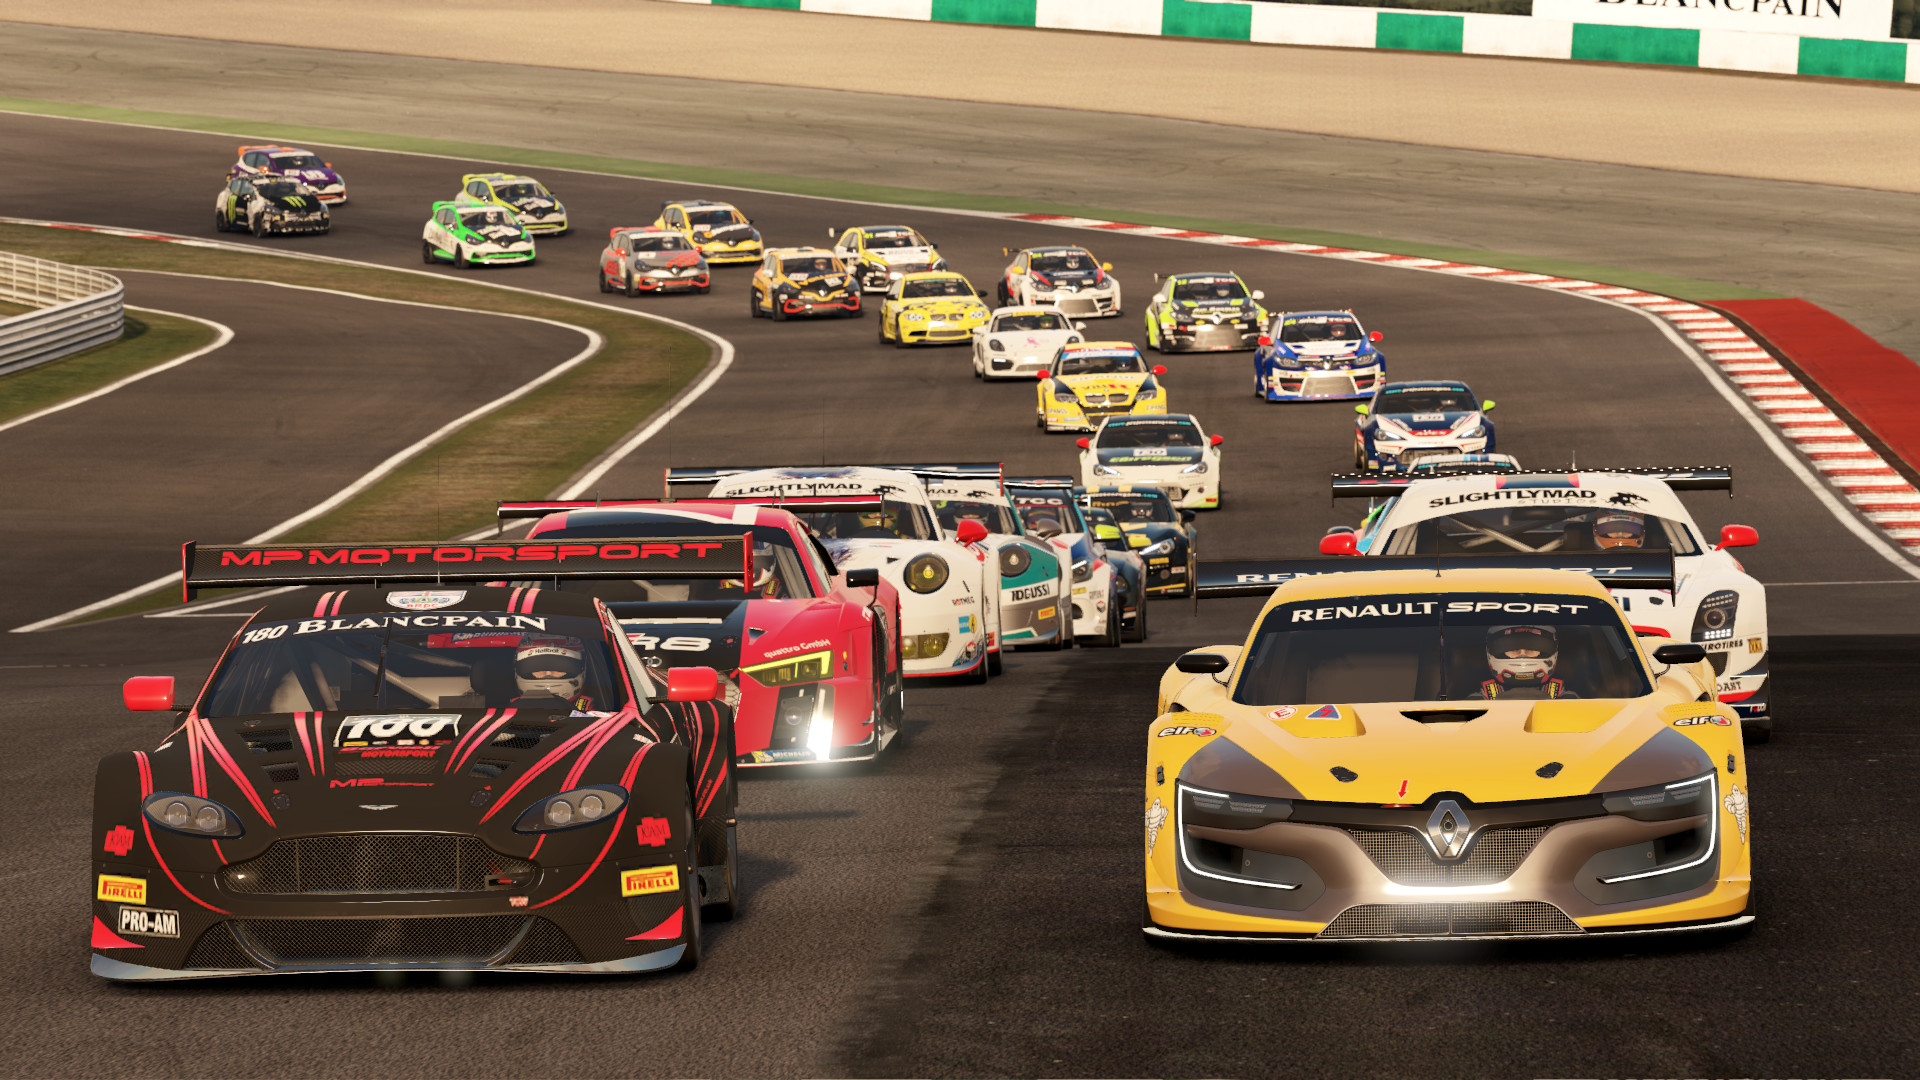 Best racing games: several race cars on the grid in Project Cars 2